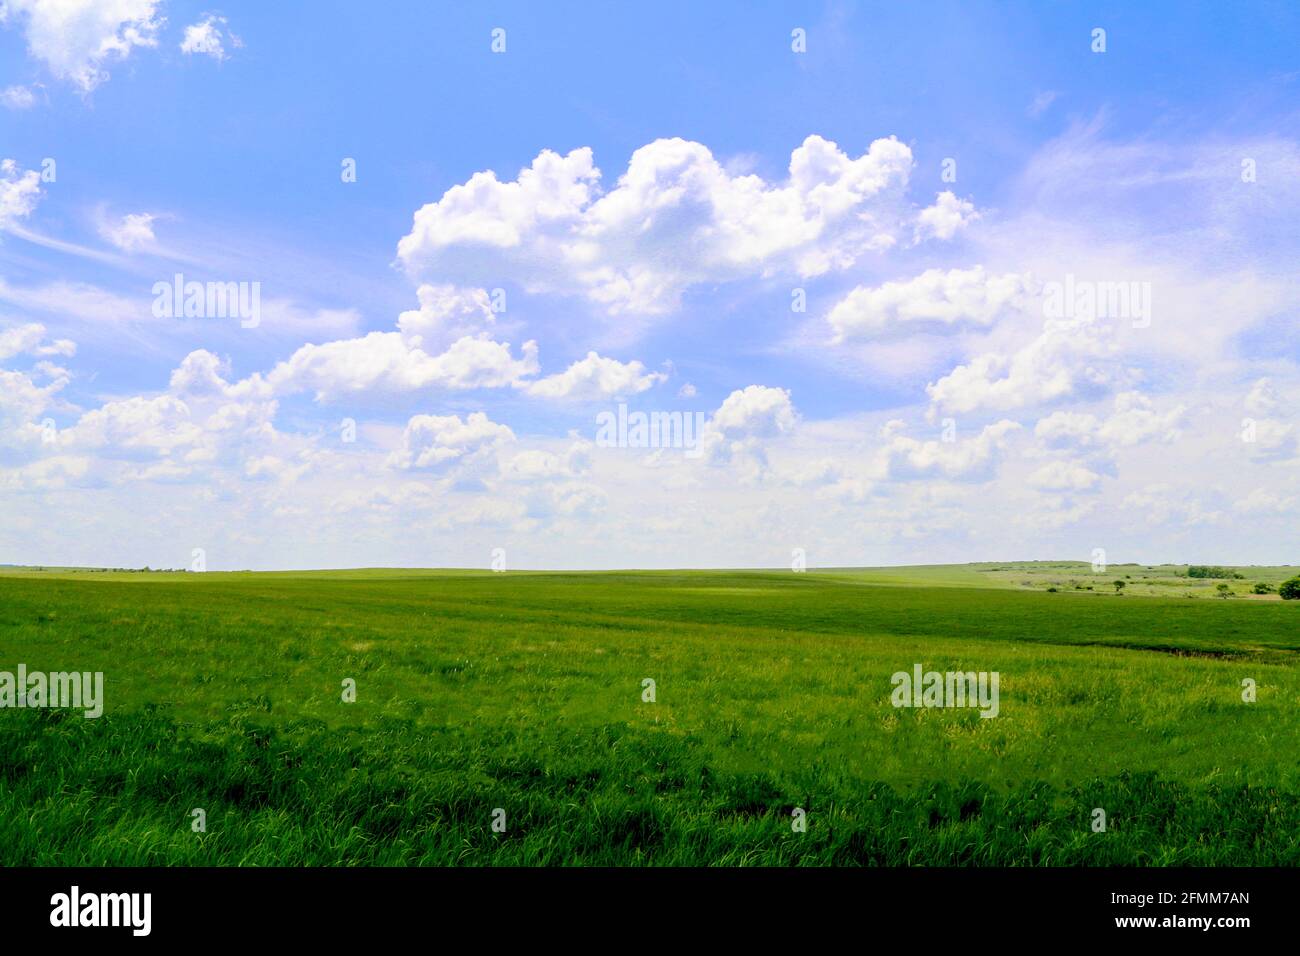 rural countryside farm grass field pasture with bright blue sky and puffy white clouds shot as a landscape scene Stock Photo